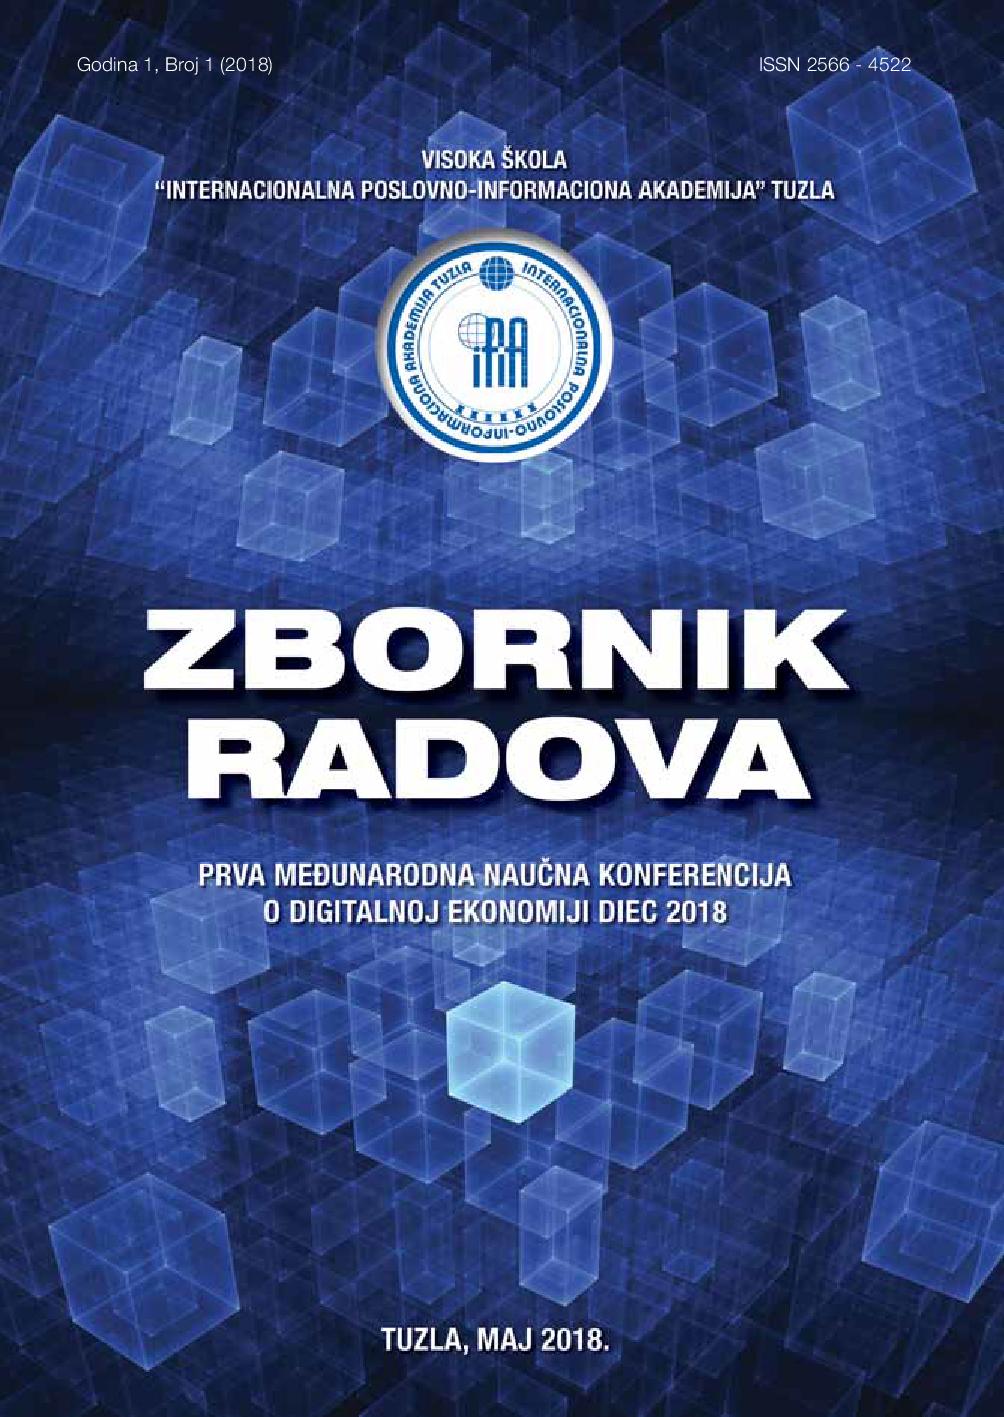 MPROVING THE PROCESS OF MANAGING RELATIONS WITH BUYERS BY THE DIGITALIZATION OF BUSINESS OPERATIONS JP ELEKTROPRIVREDA BIH Cover Image